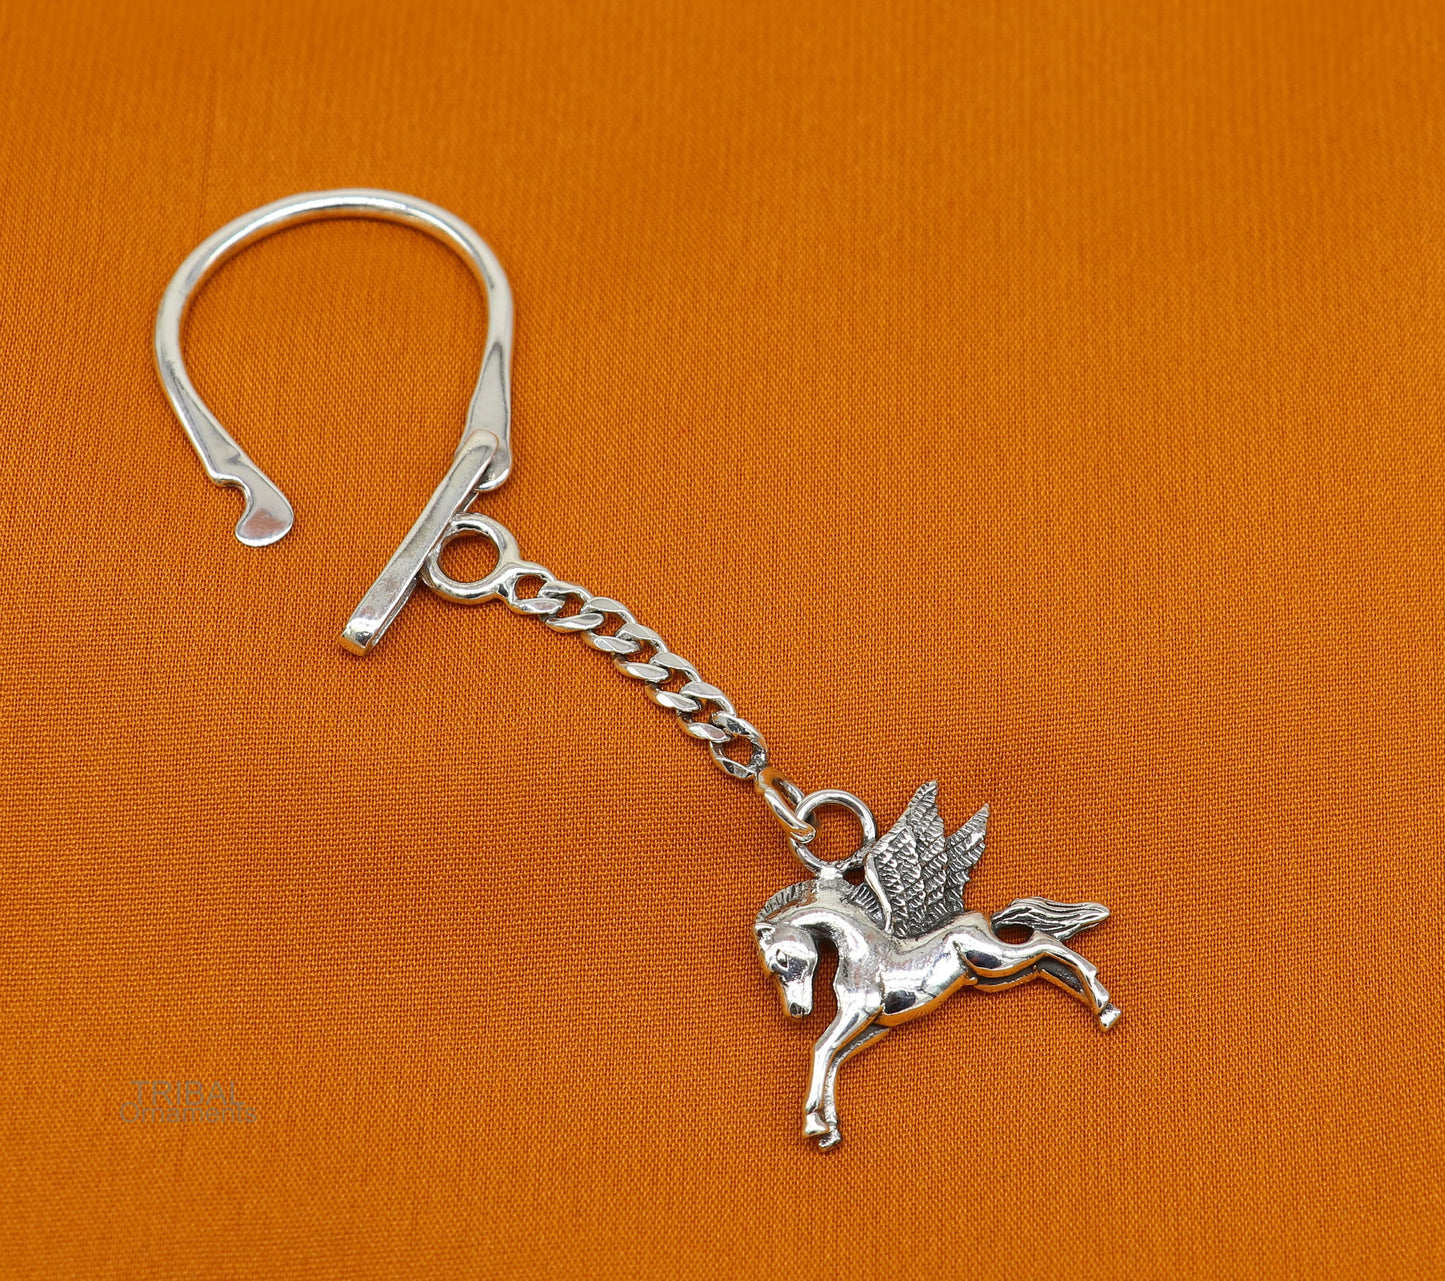 925 Sterling silver handmade unique unicorn horse design solid key chian, stylish royal gifting silver accessories unisex gift jewelry kch04 - TRIBAL ORNAMENTS